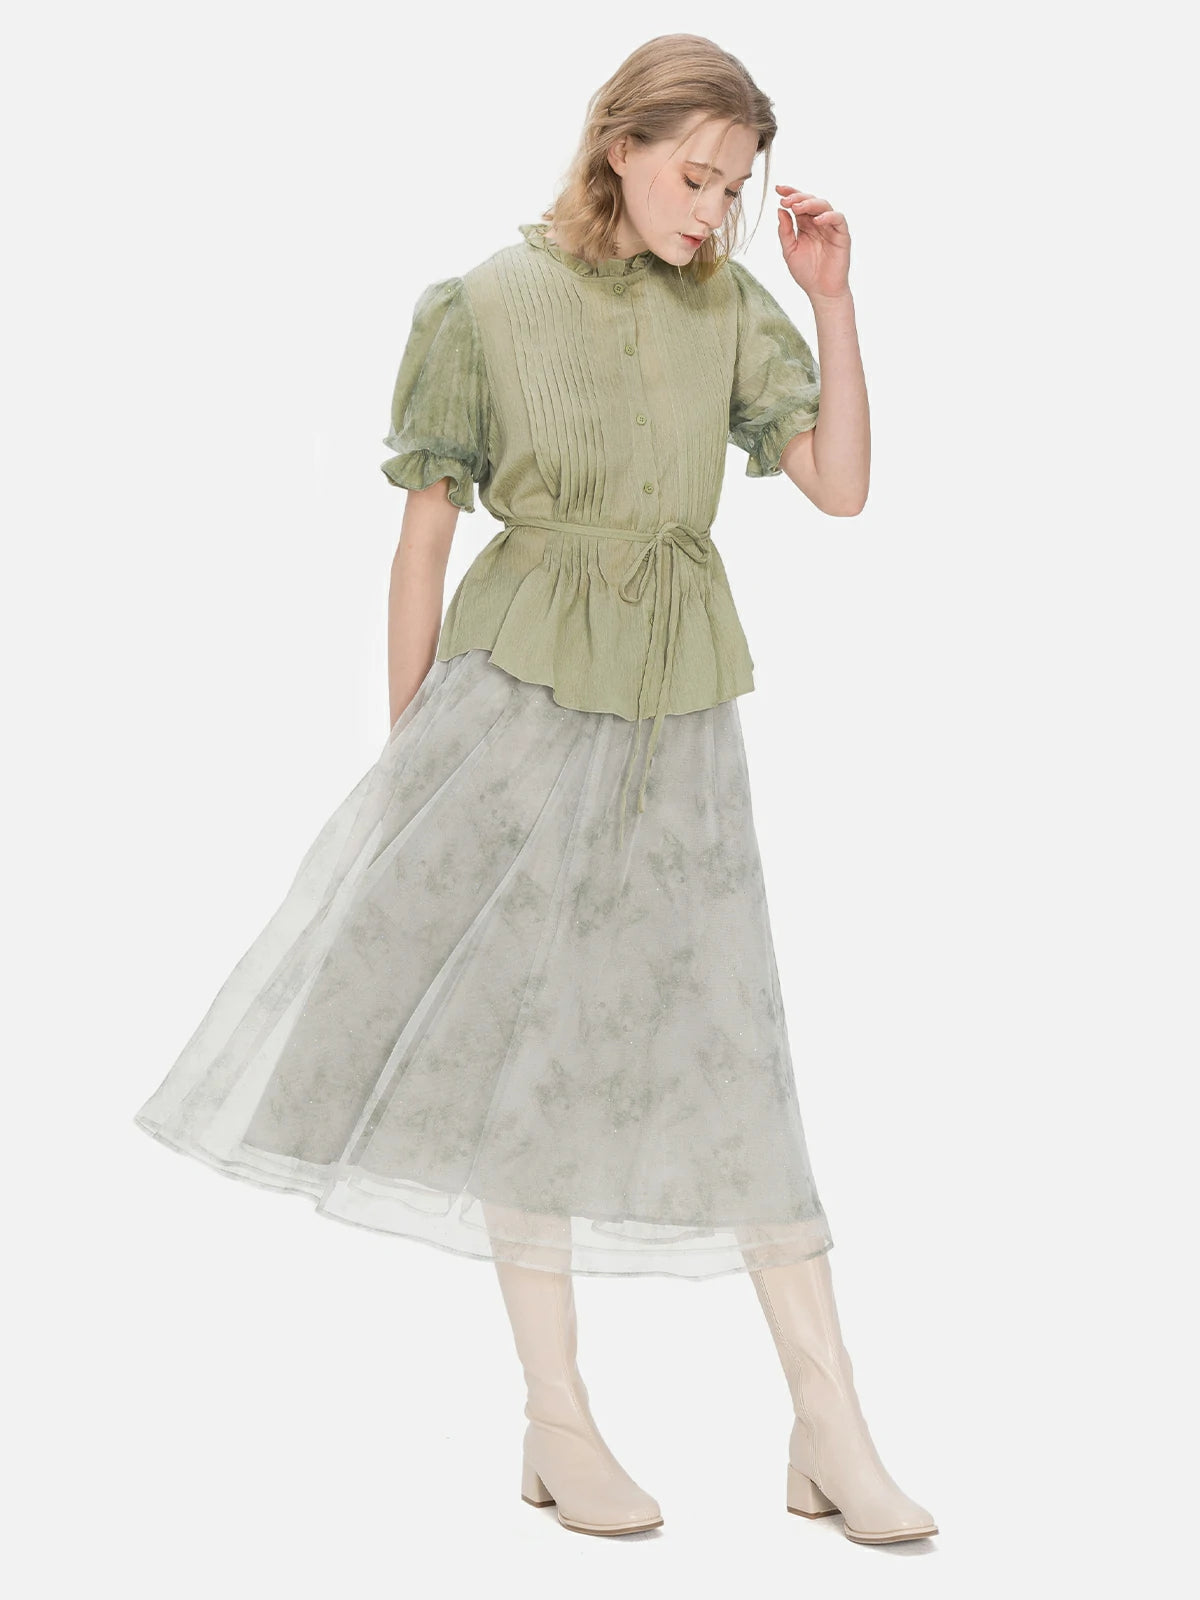 Fashion-forward short-sleeved blouse in green, featuring mesh bubble sleeves and a waist tie, perfect for versatile and chic styling.